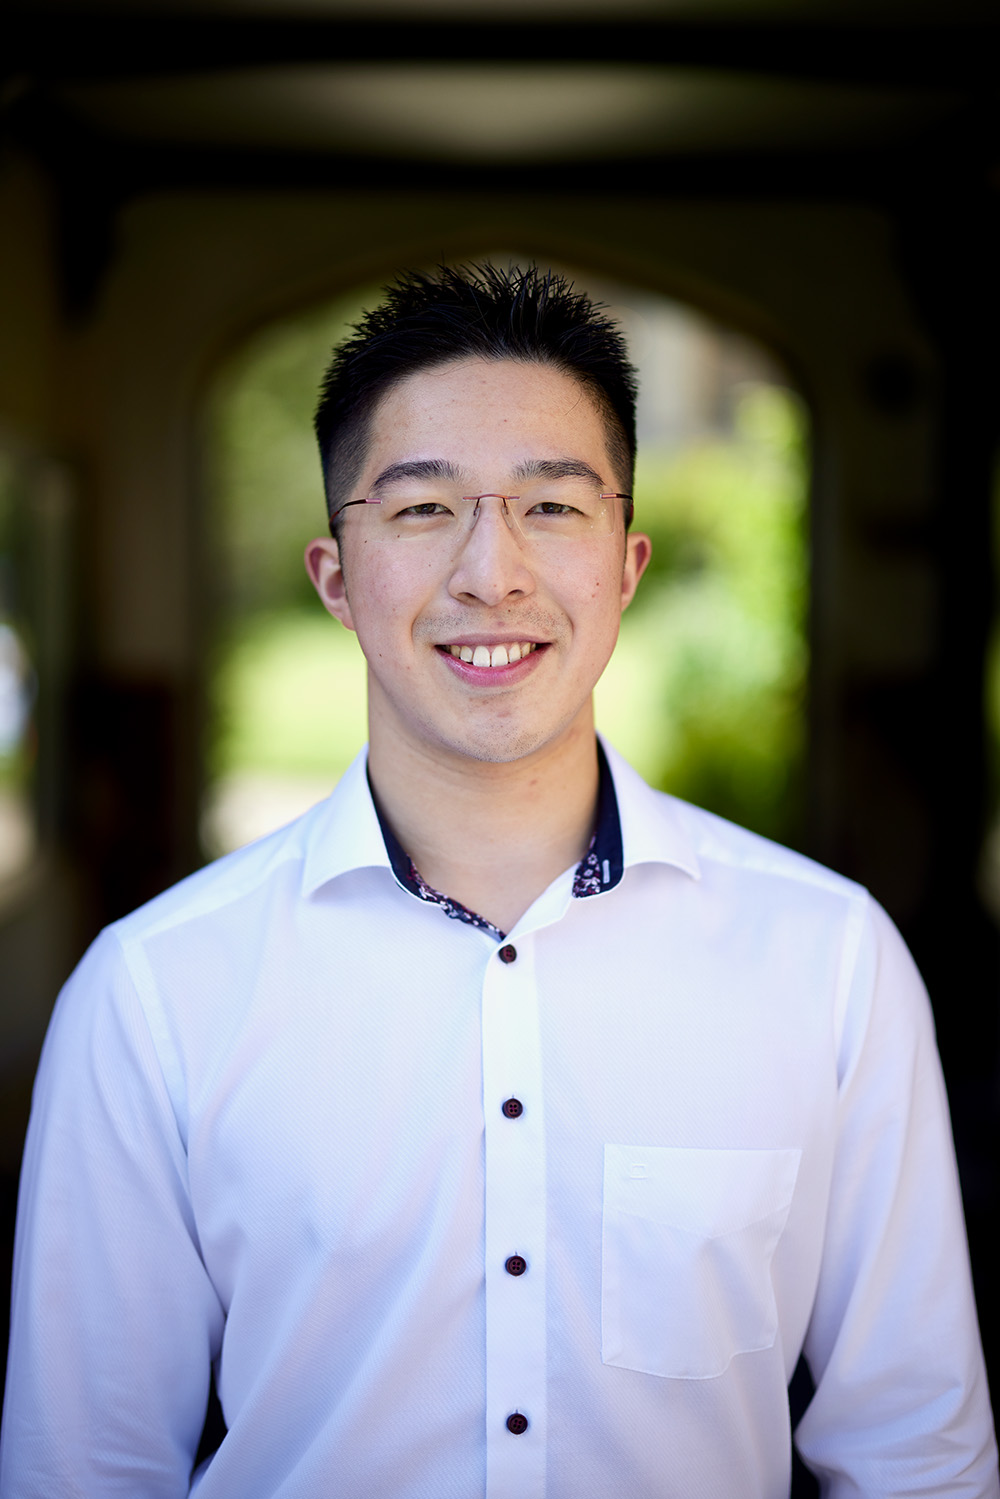 Head shot of Oscar Lu, smiling, with Chapel Quad in background